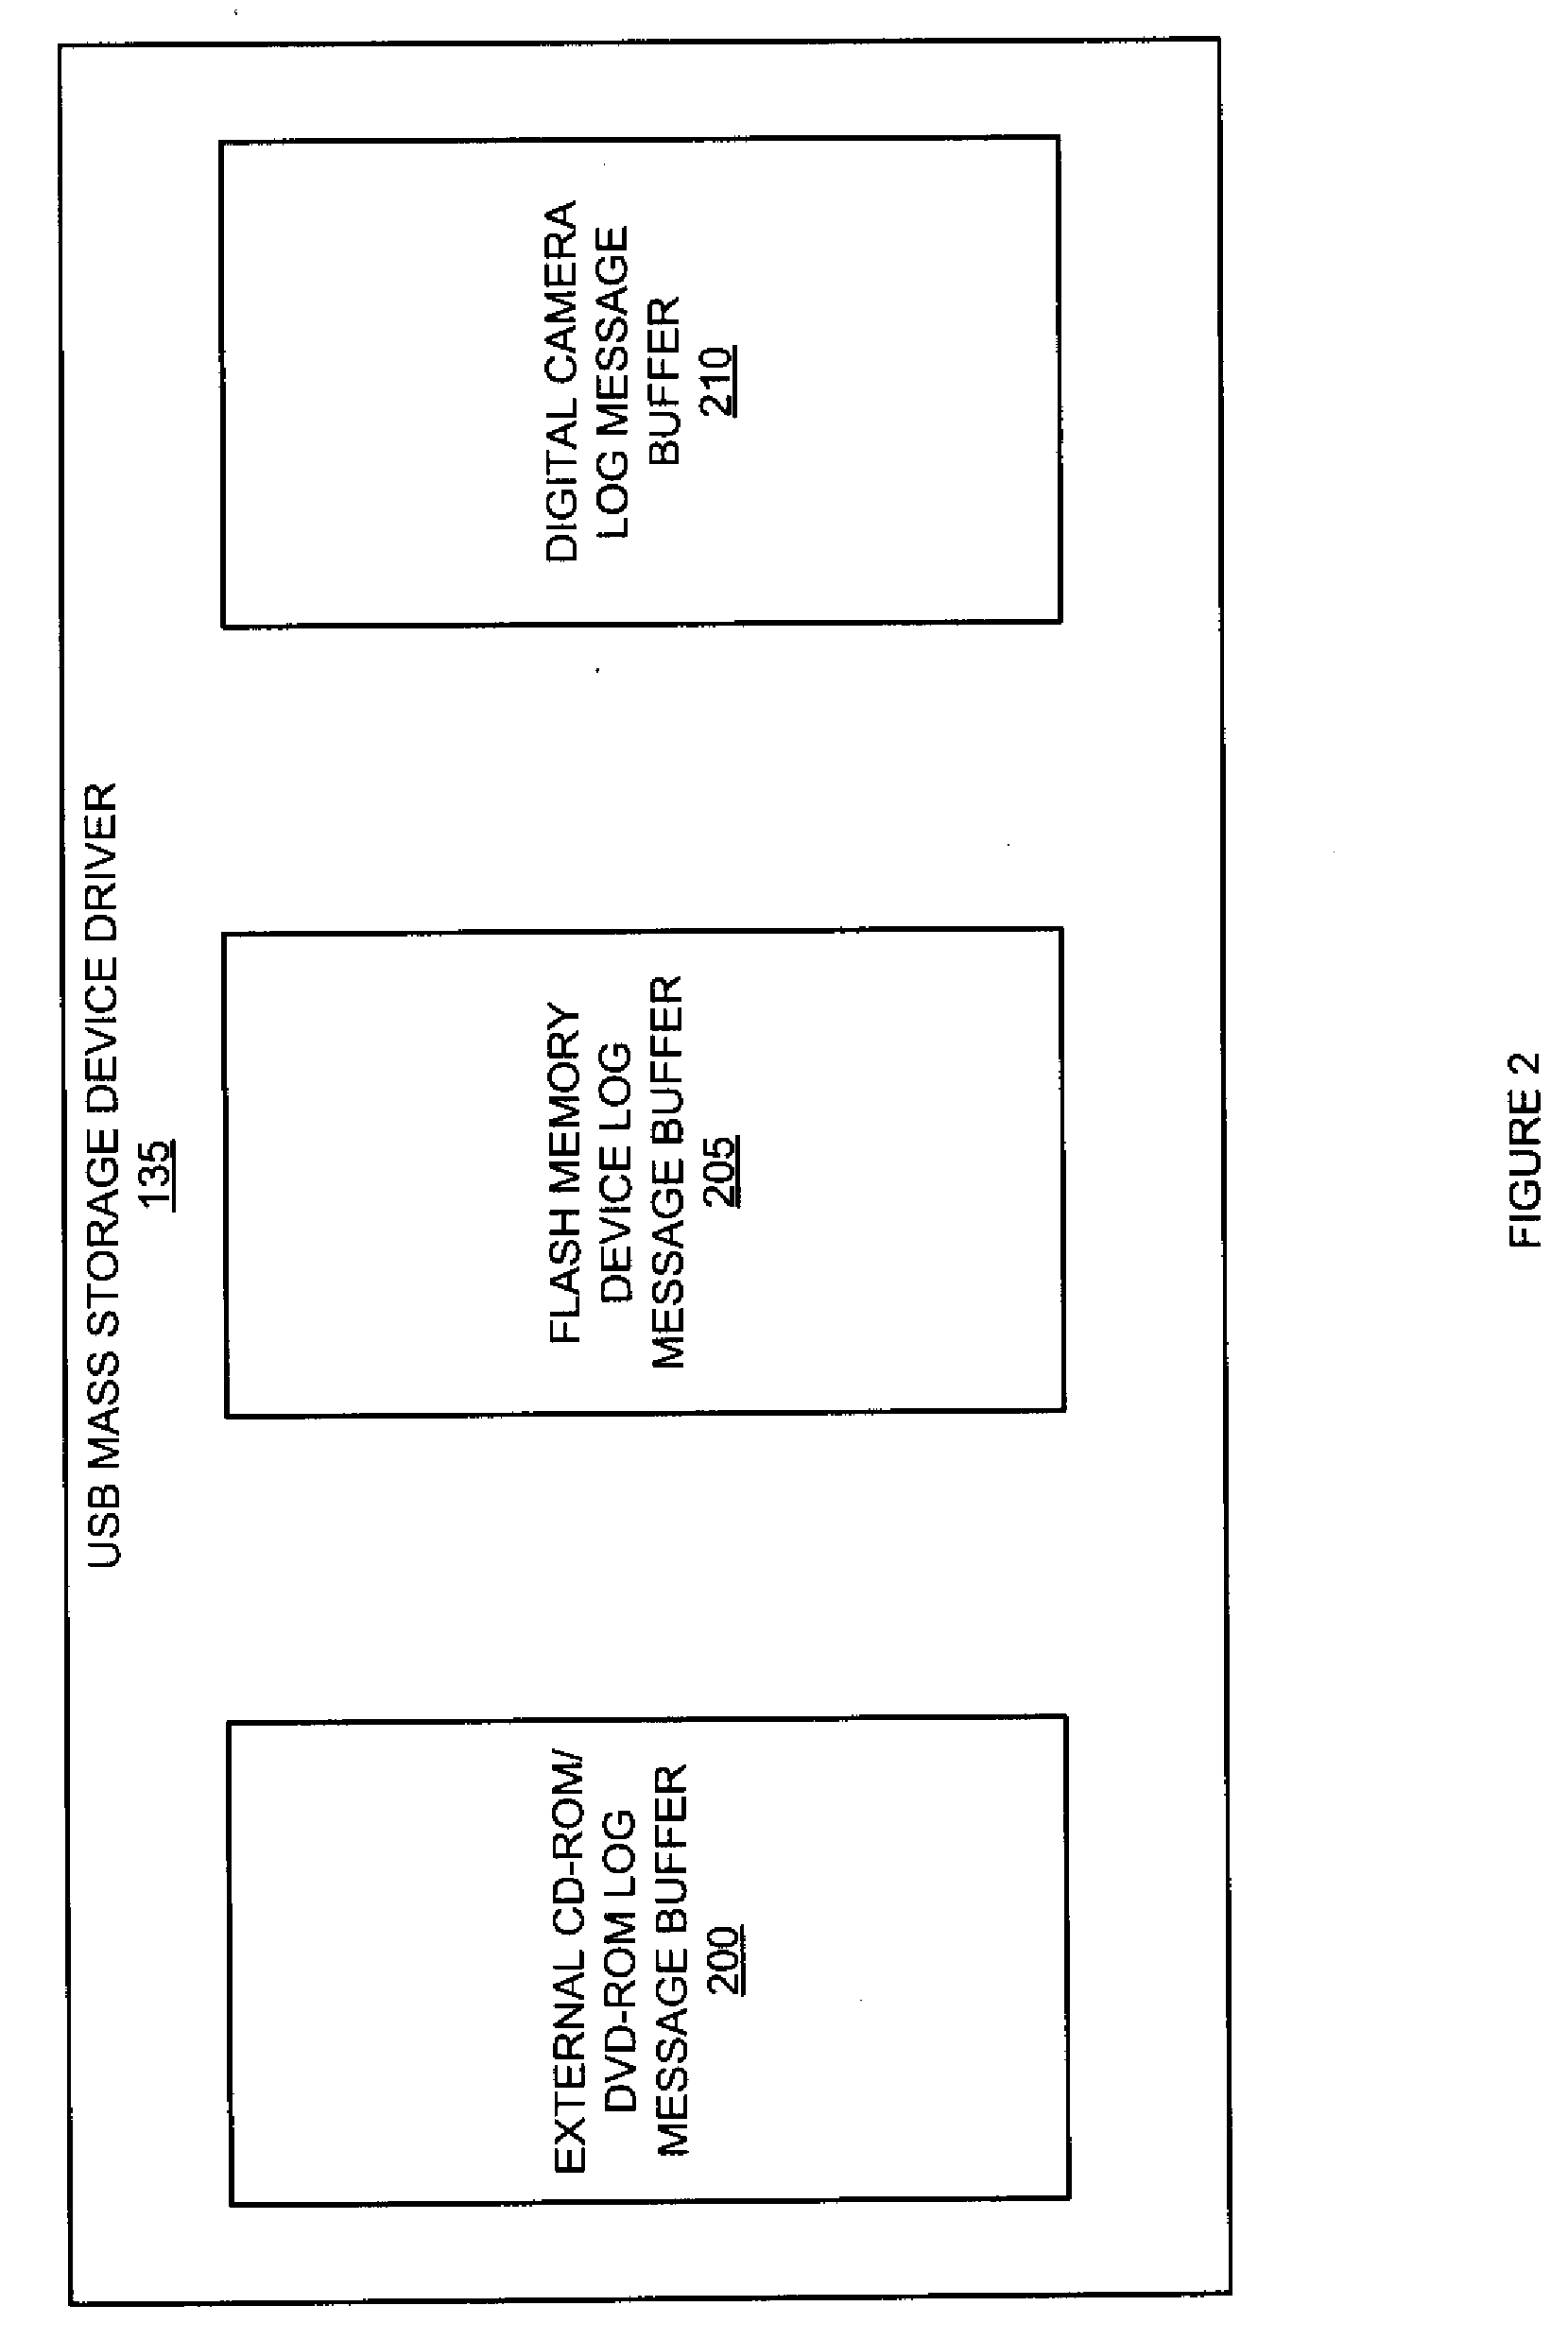 Method and System for Throttling Log Messages for Multiple Entities